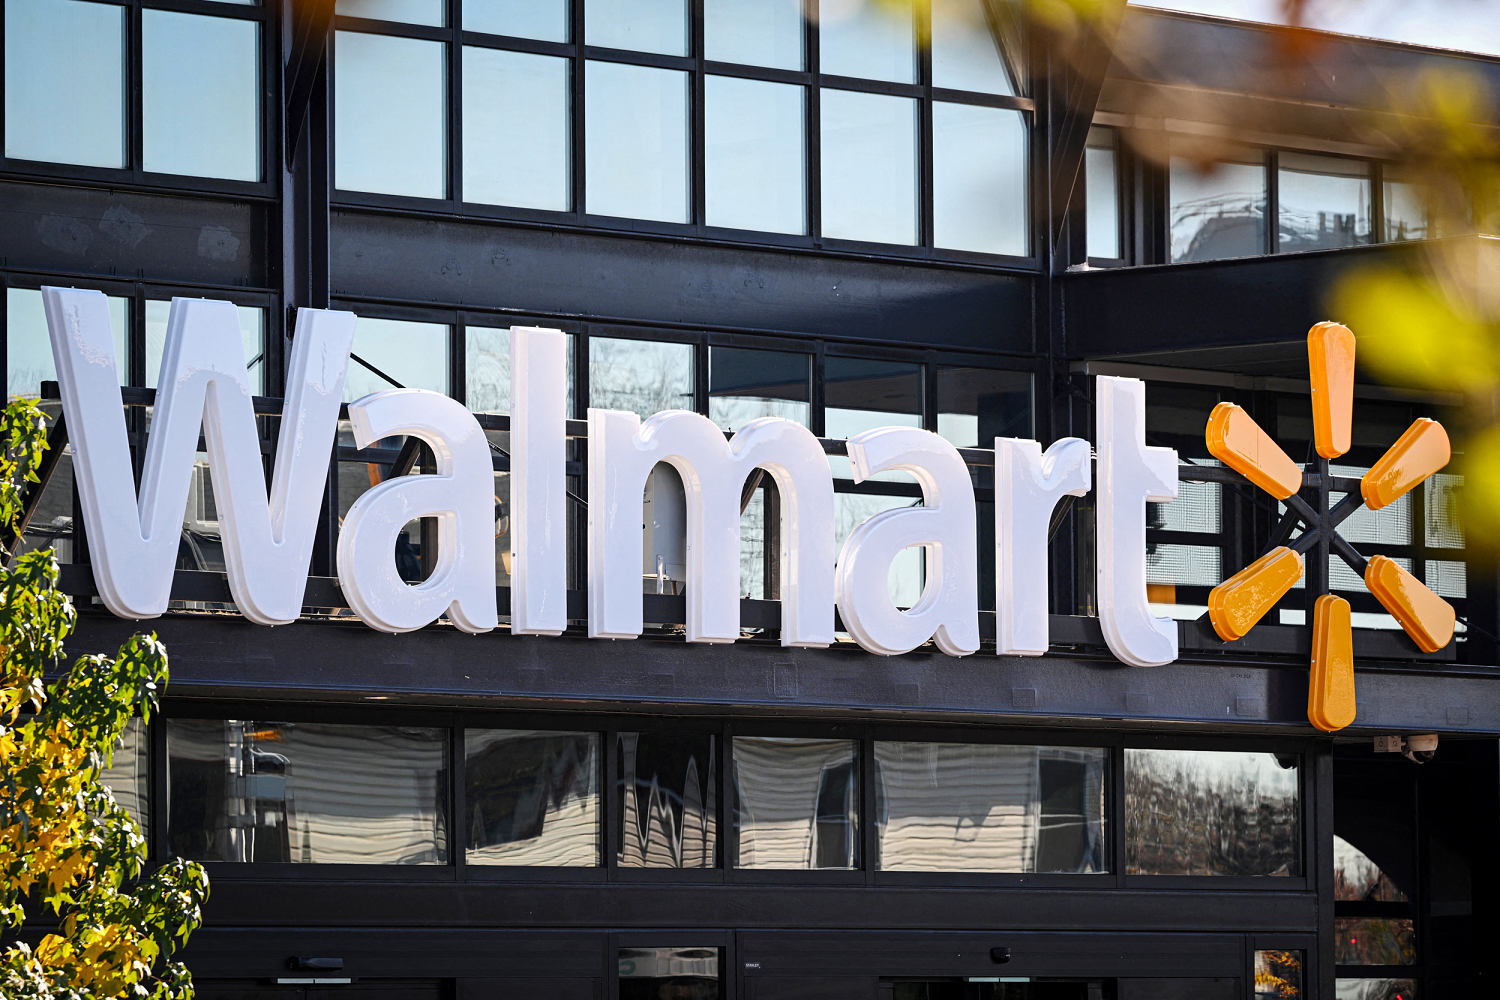 Walmart says more diners are buying its groceries as fast food gets pricey